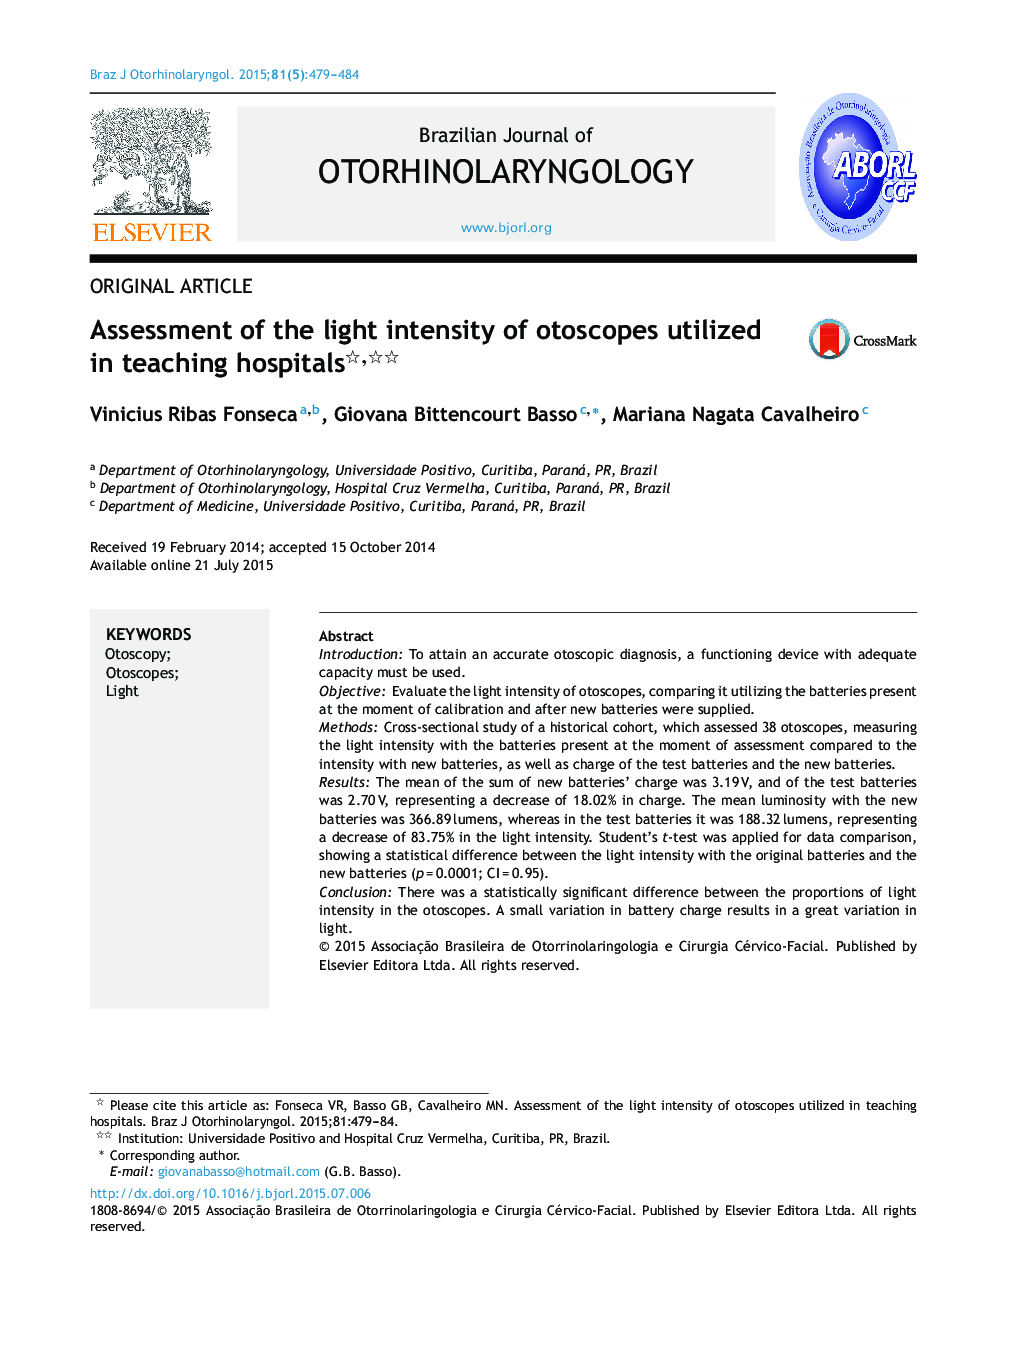 Assessment of the light intensity of otoscopes utilized in teaching hospitals 